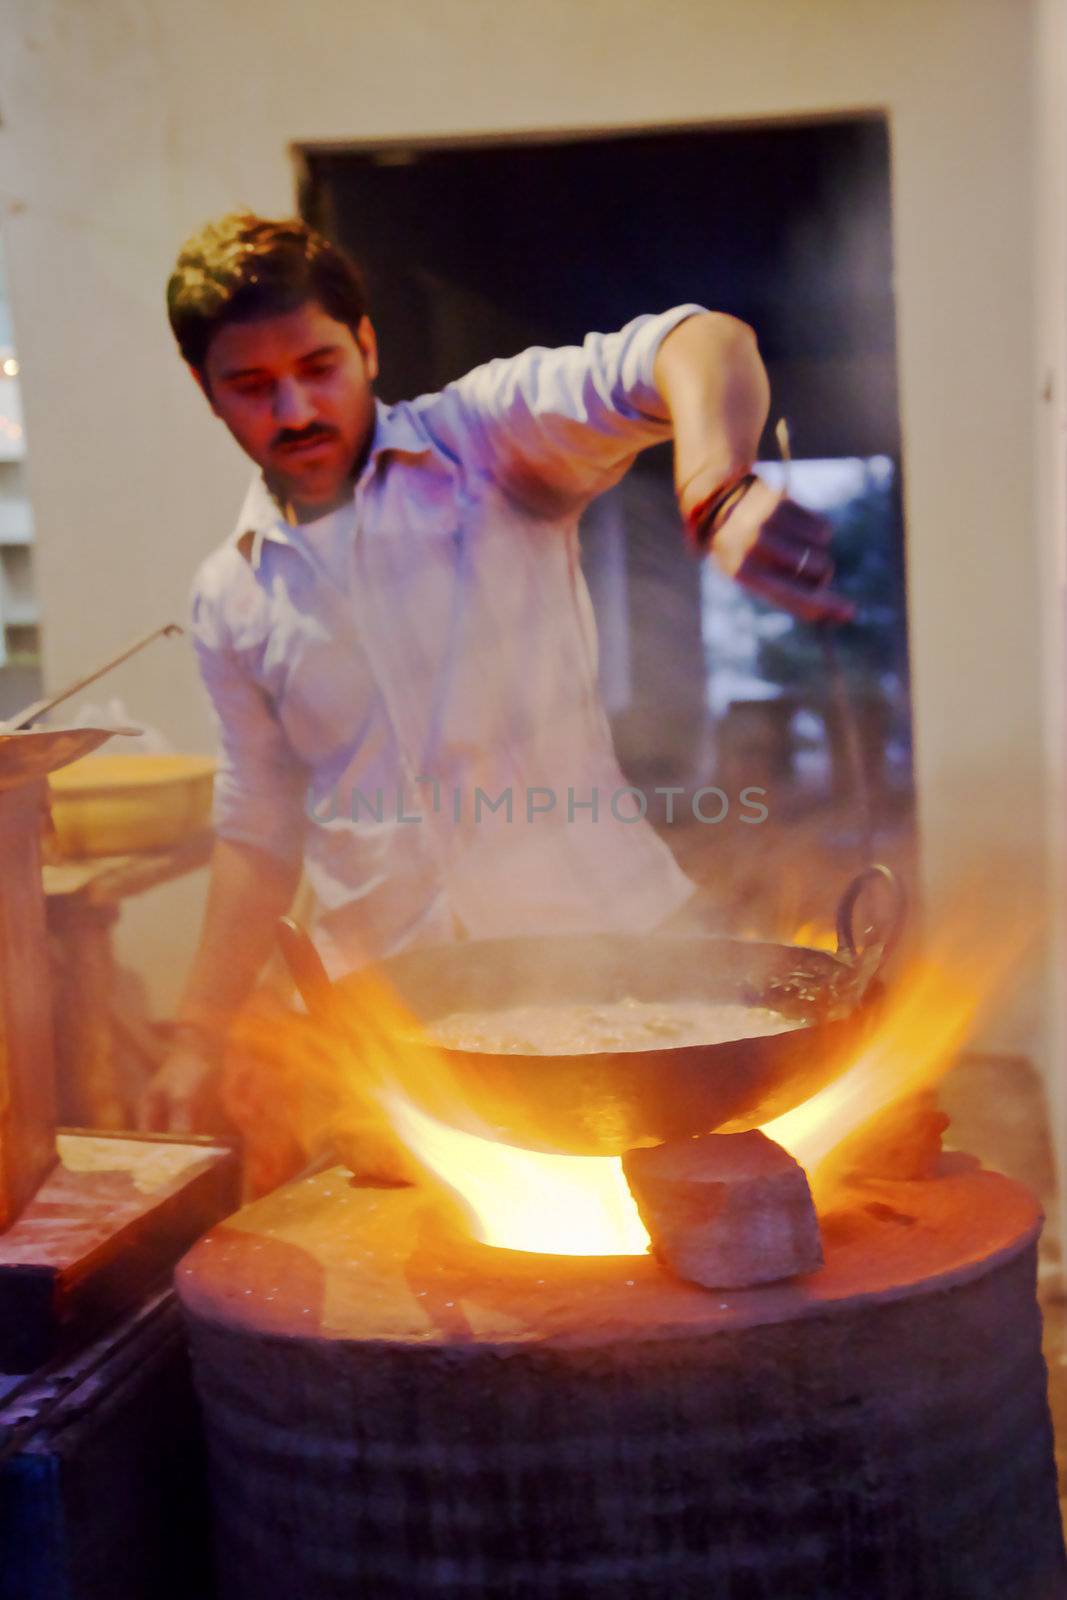 Kashmir Jammu, Northern India, Himalayas - December 18, 2011; Vertical portrait of Roadside cafe chef stirring the pot of curry in a wok over a tandoor hob in Jammu Kashmir Himalayan region of Northern India with crop margings